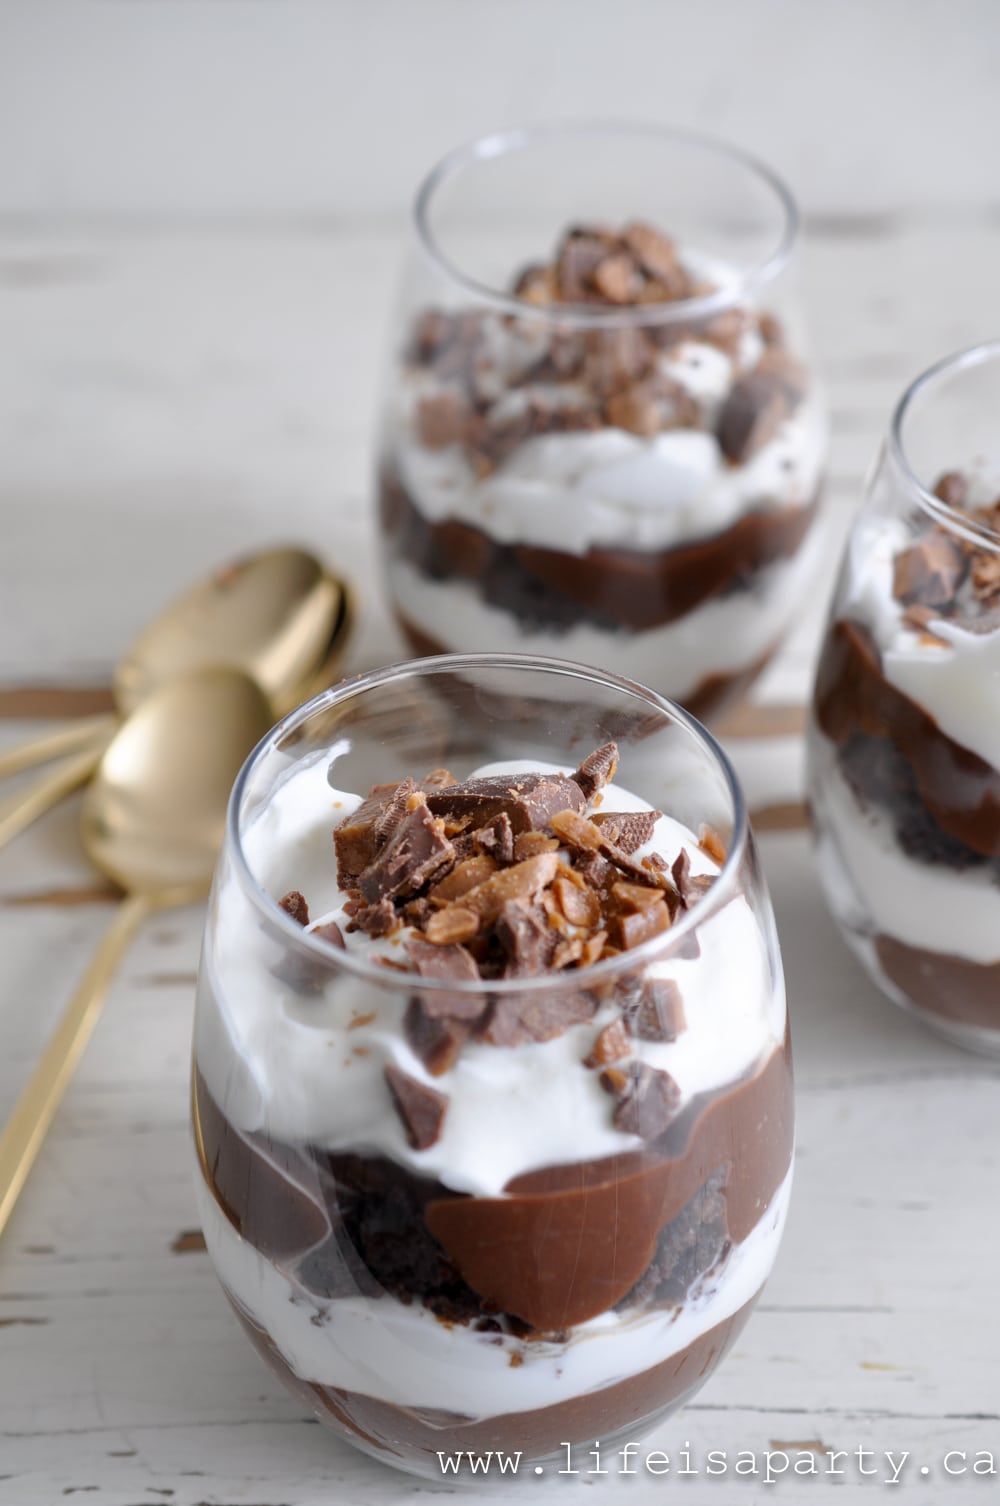 Easy Chocolate Trifle: made with store bought ingredients, this is sure to be a crowd pleaser, and perfect for any chocolate lover.